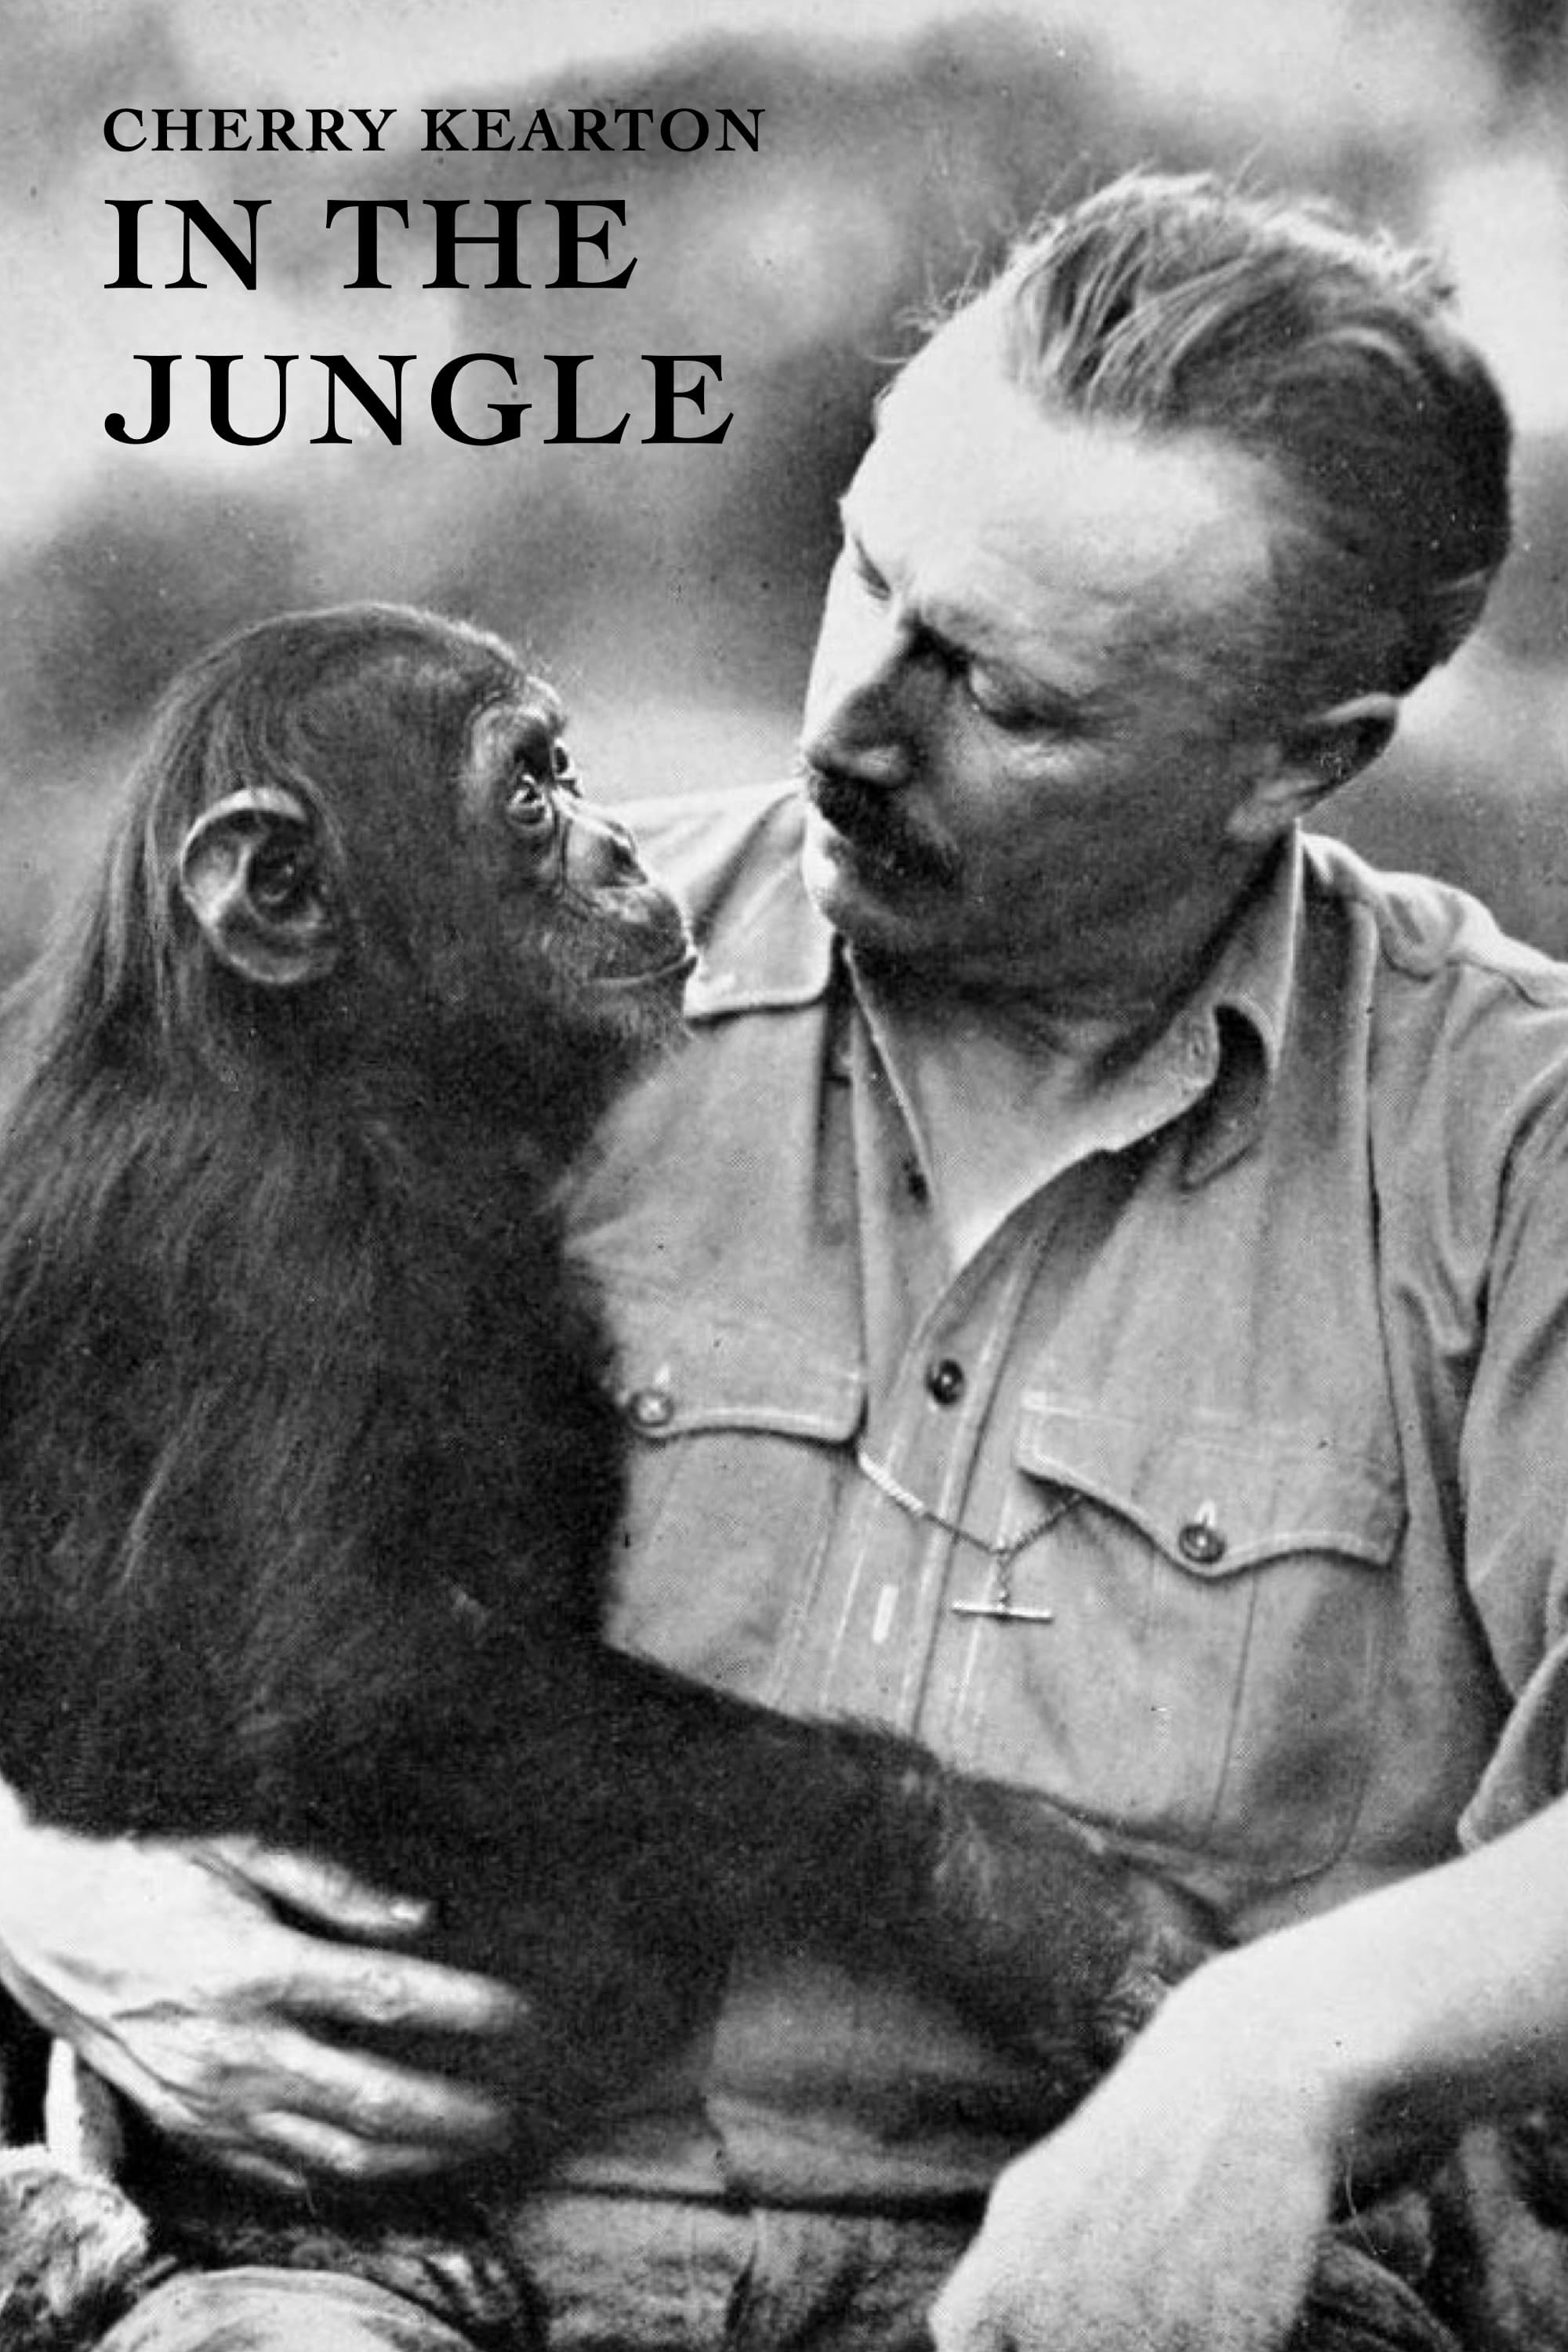 With Cherry Kearton in the Jungle